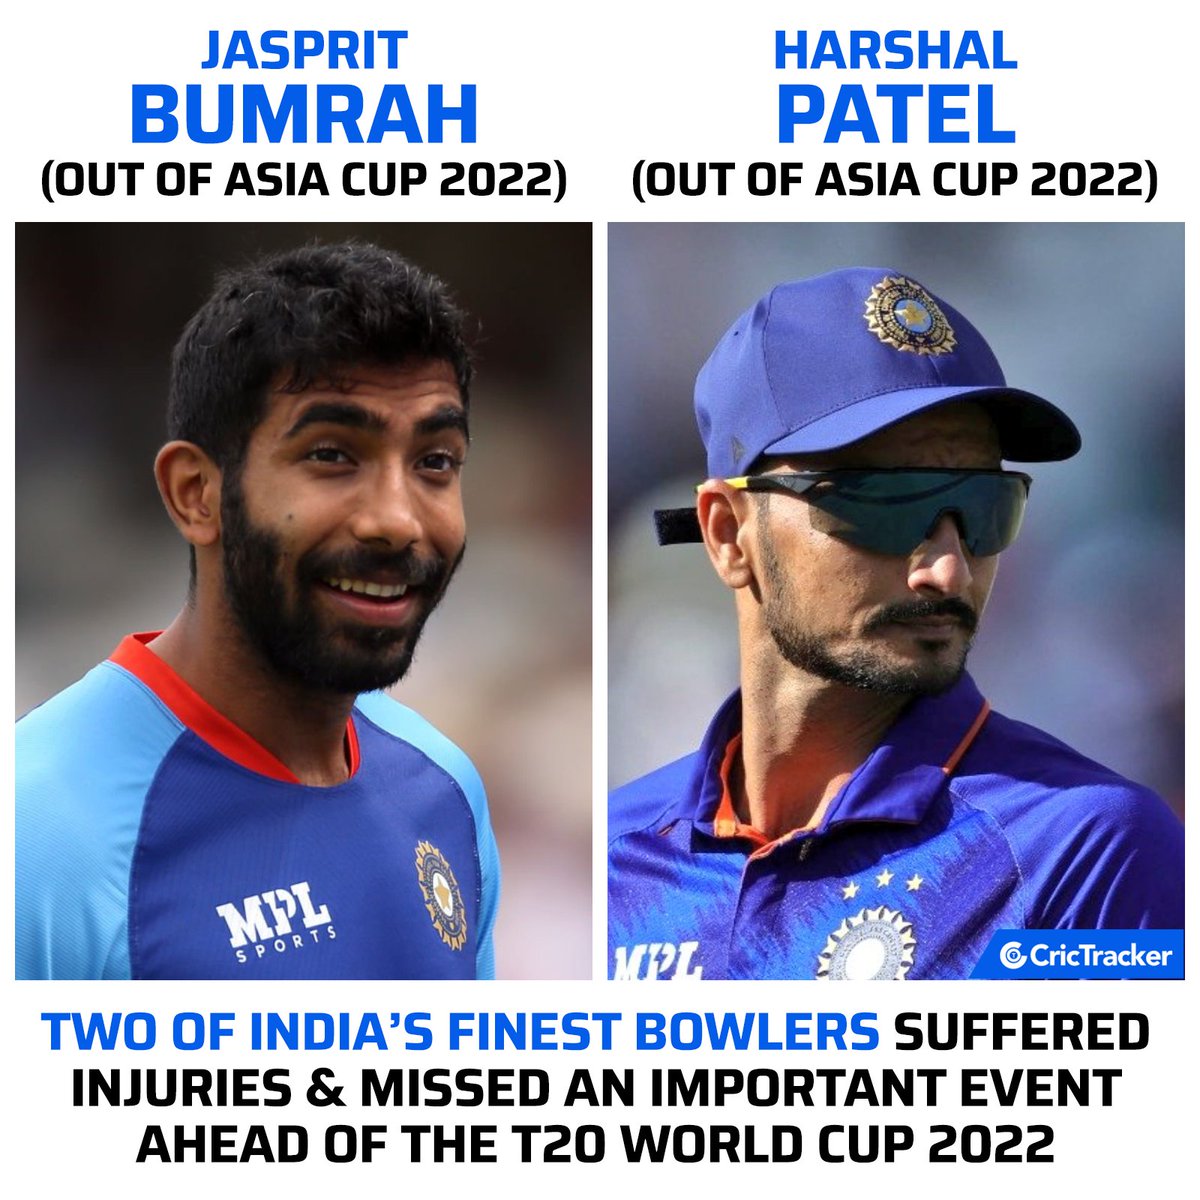 Wishing Jasprit Bumrah and Harshal Patel a speedy recovery 🙌